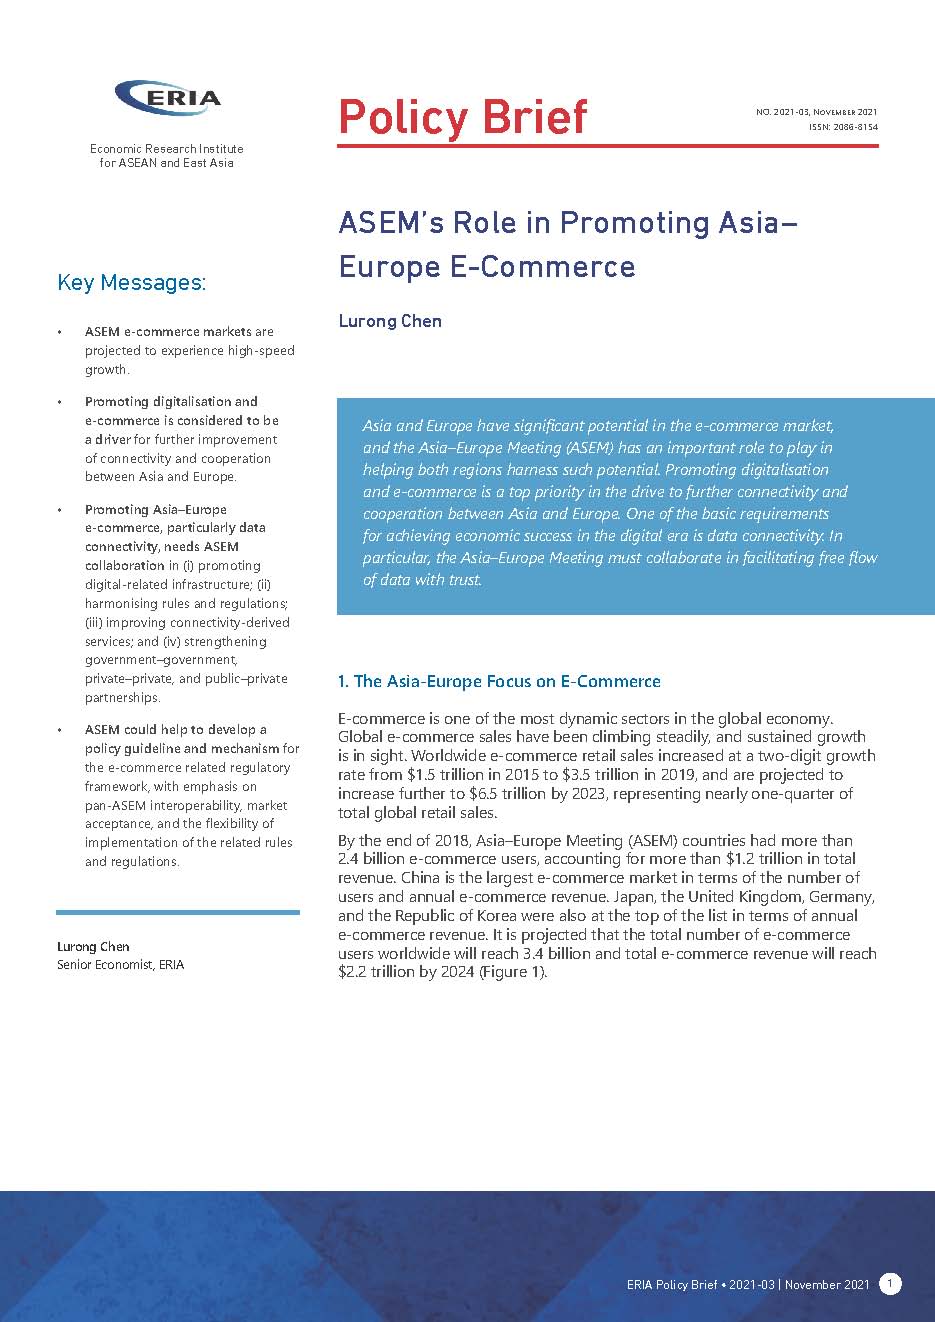 ASEM’s Role in Promoting Asia-Europe E-Commerce